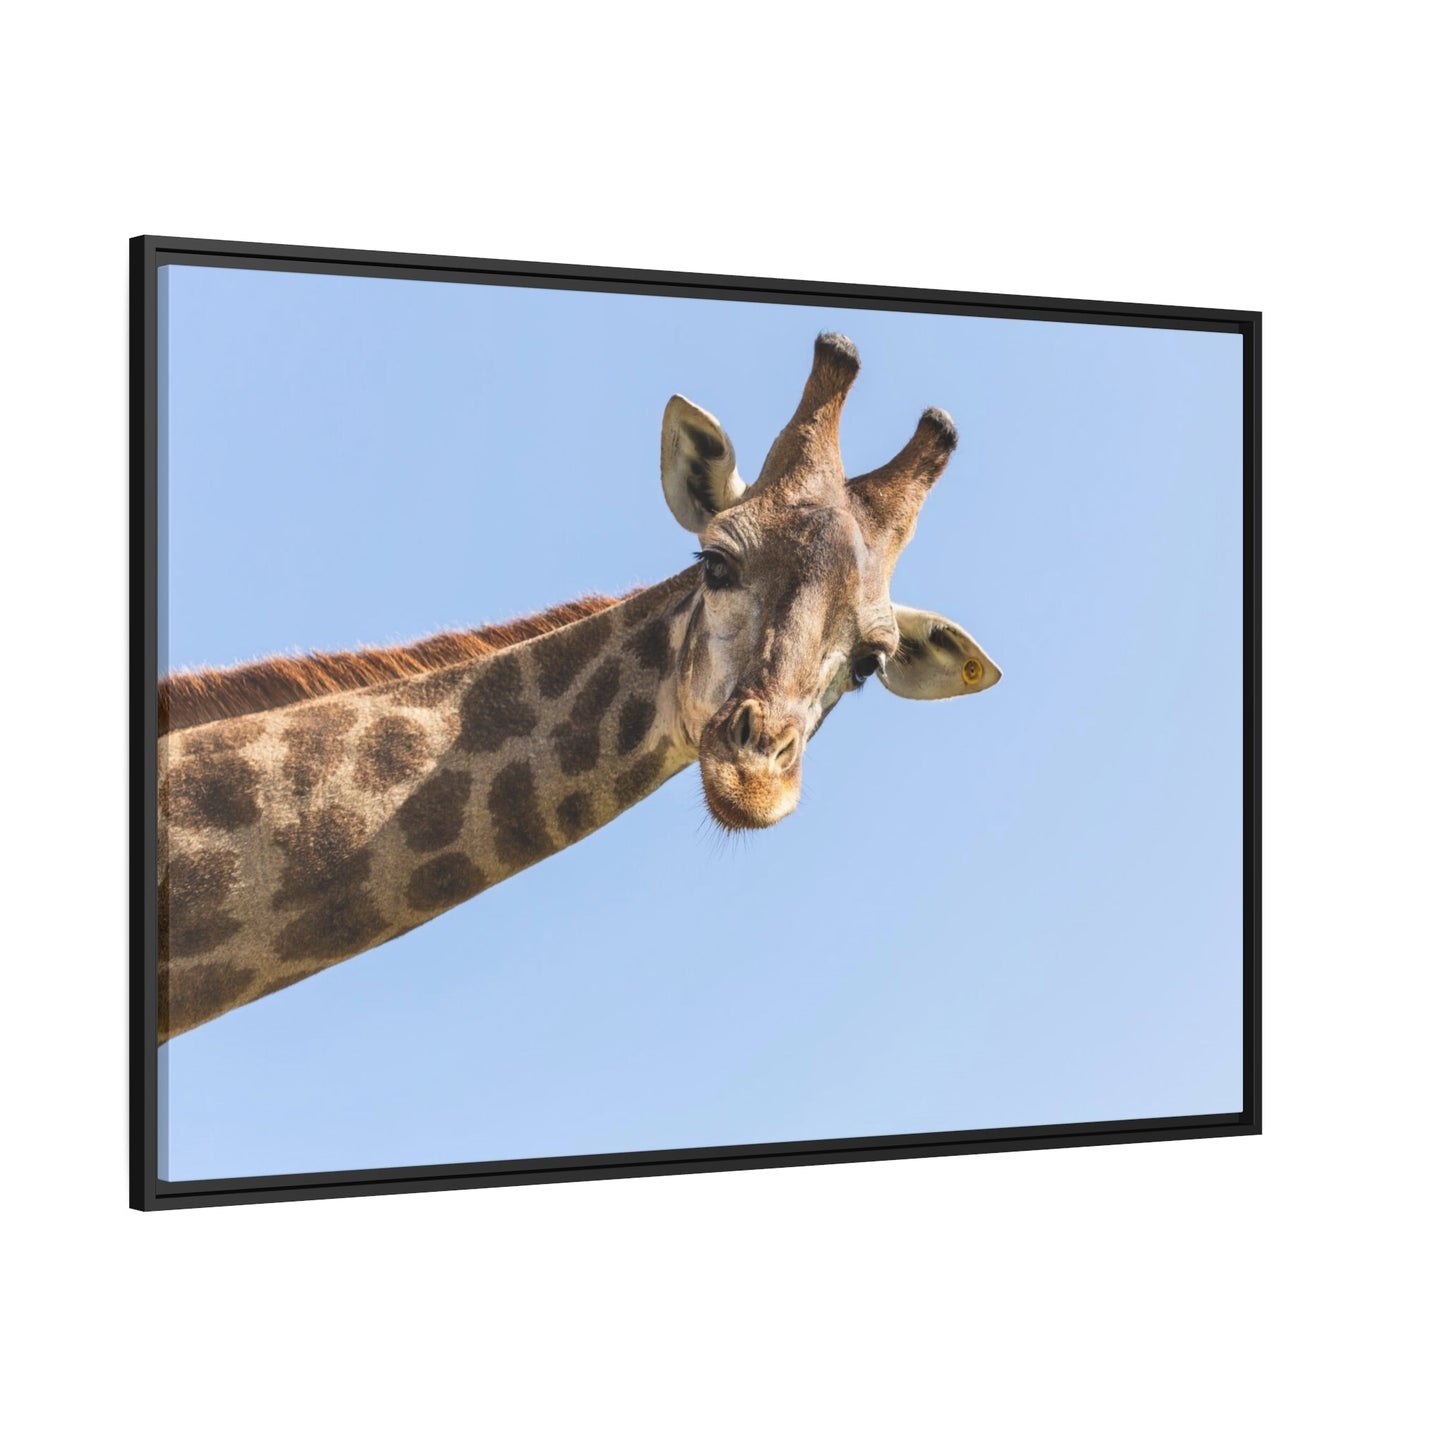 The Tall and Proud: Canvas & Poster Framed Art of a Majestic Giraffe